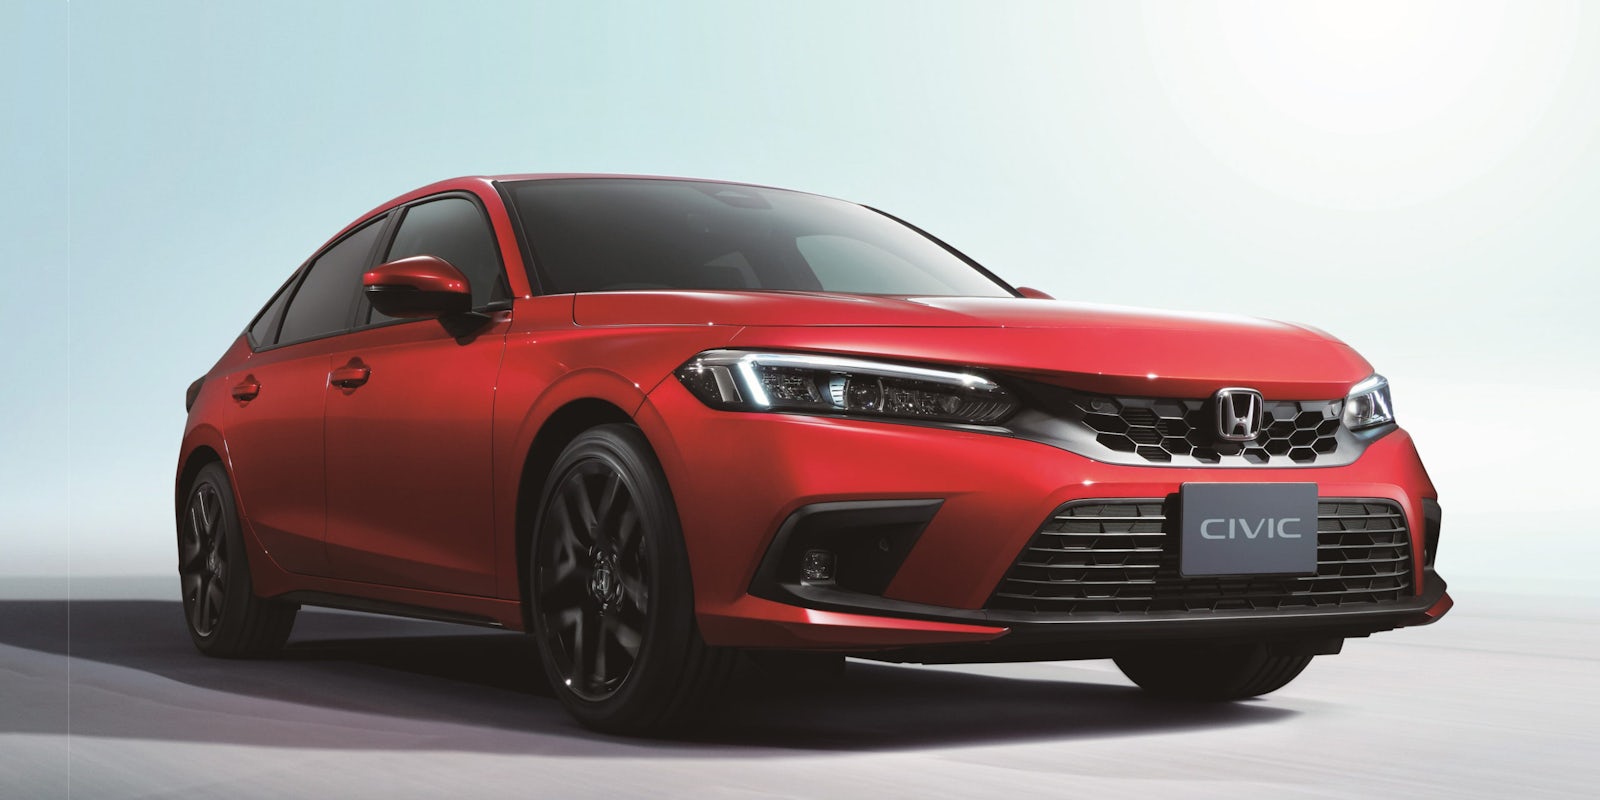 New Honda Civic hatchback hybrid revealed prices, specs and release